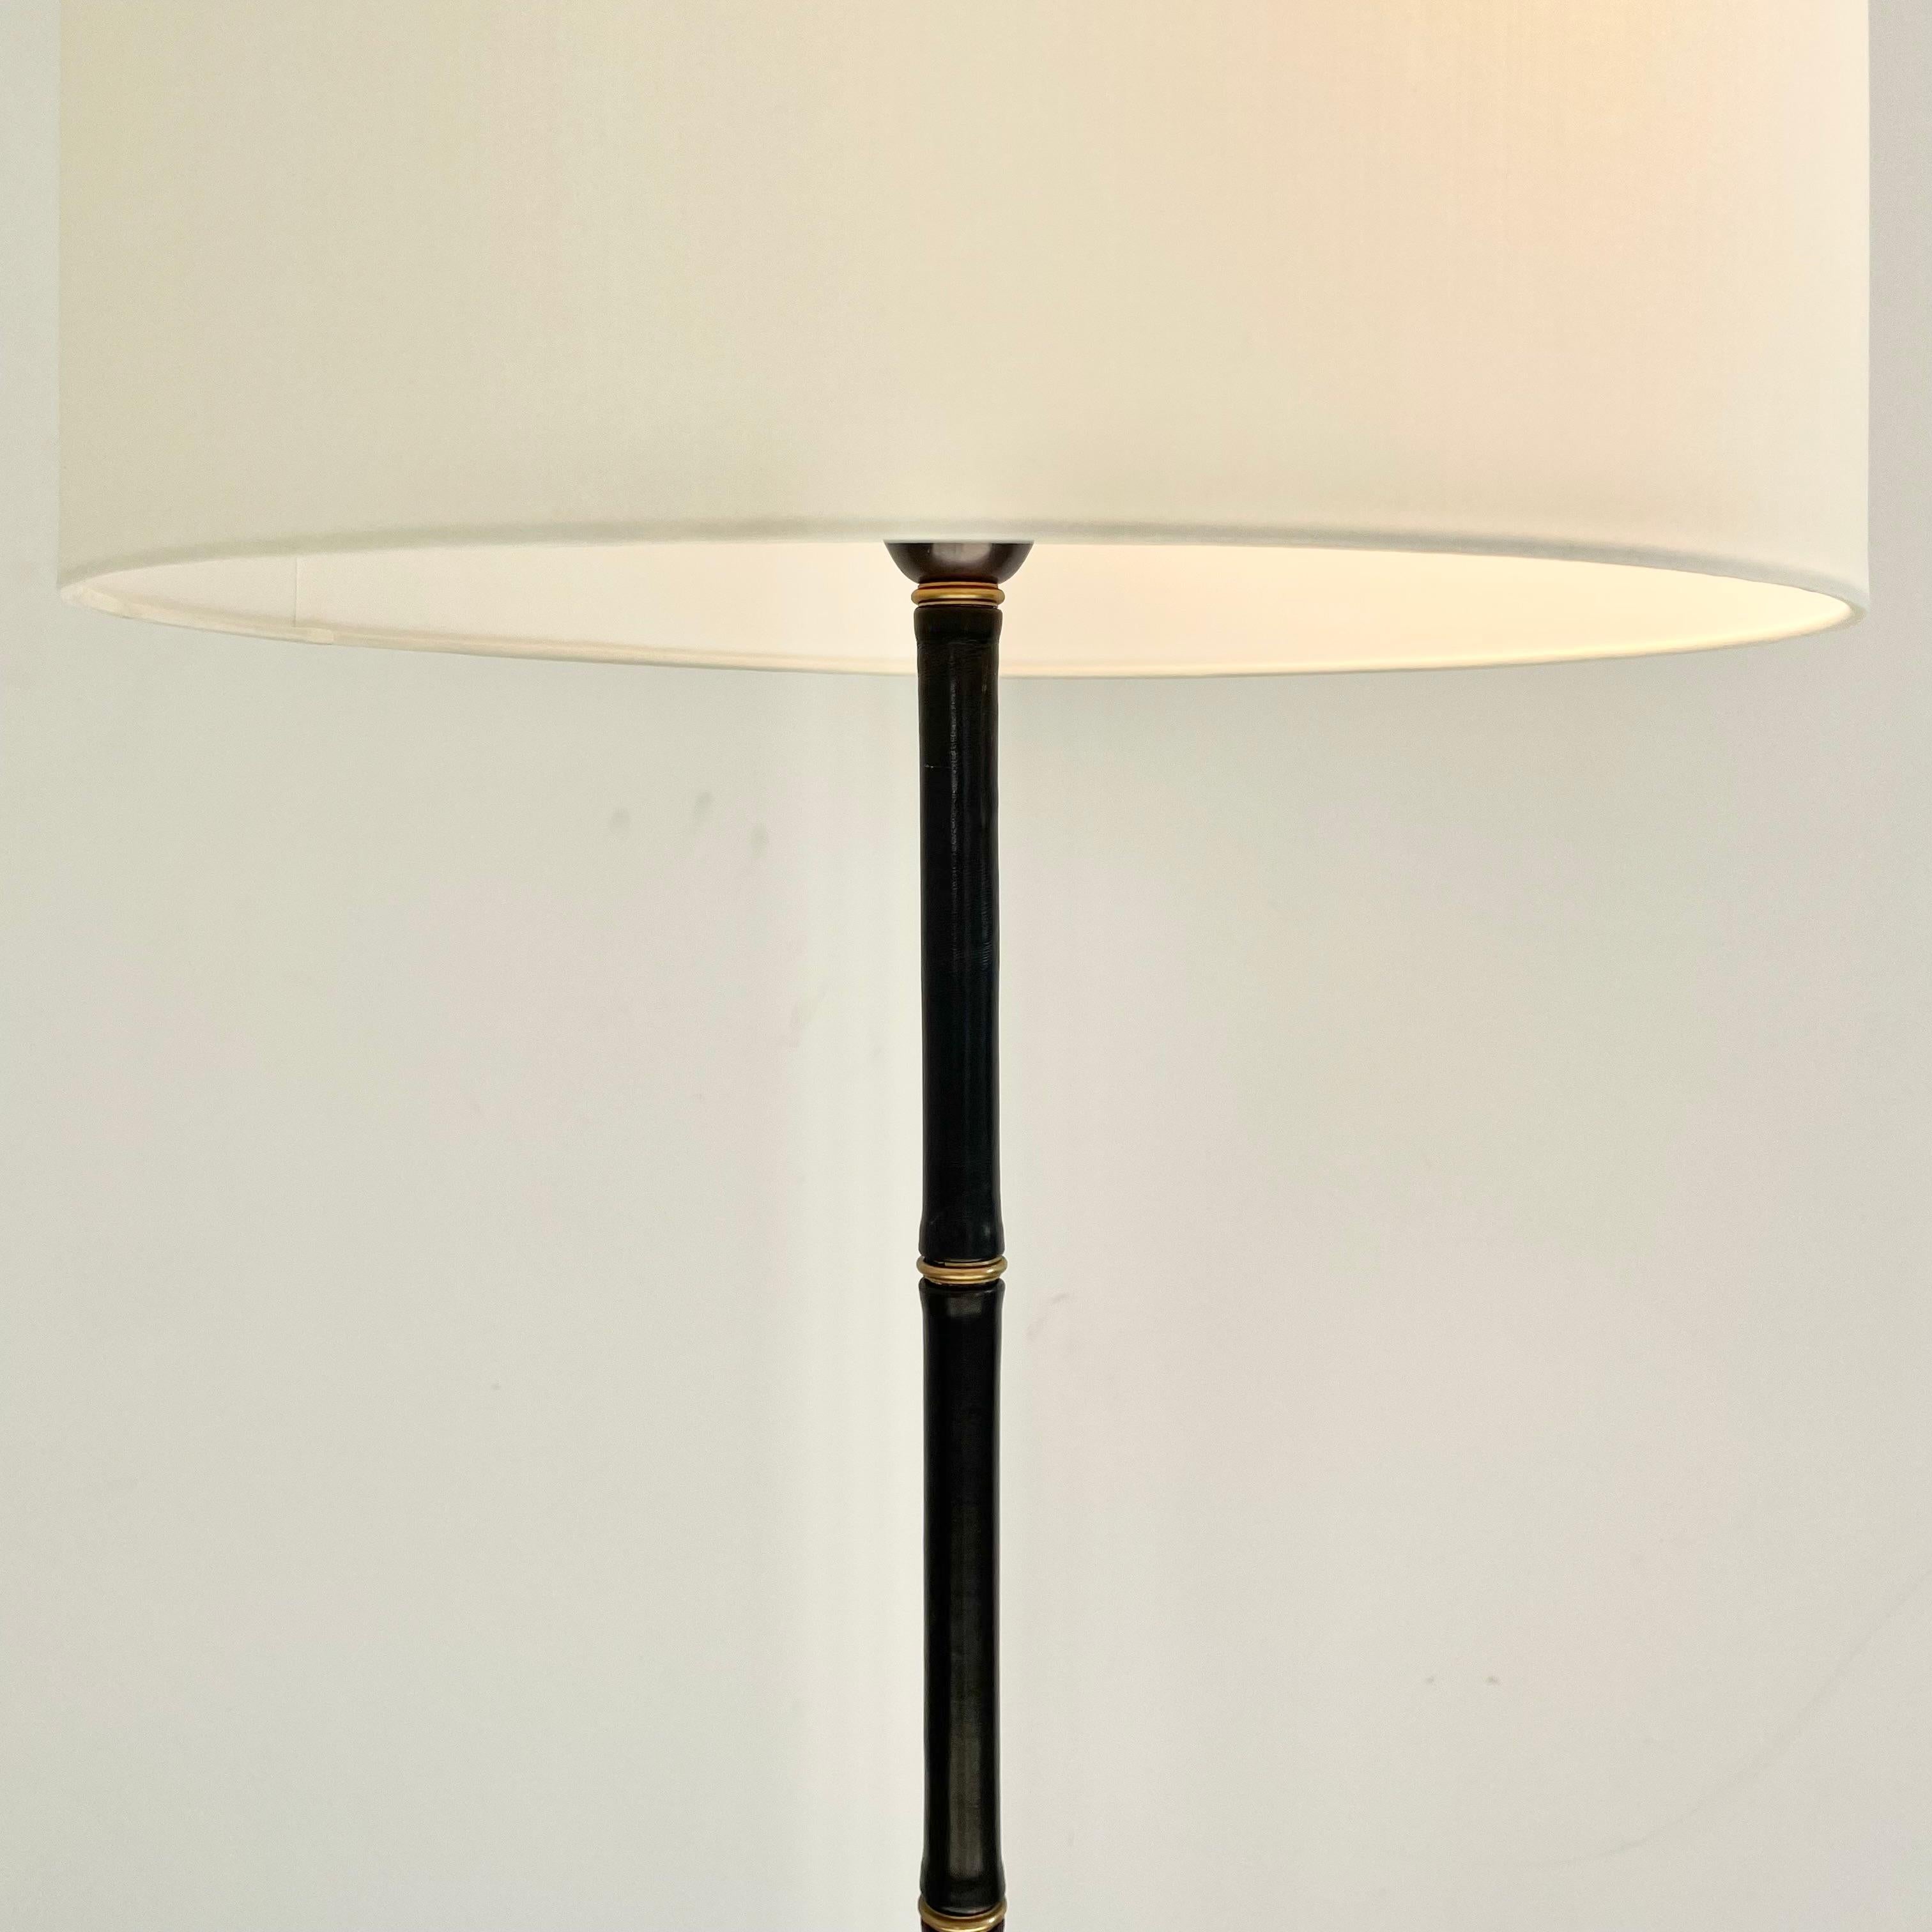 French Jacques Adnet Black Leather and Brass Floor Lamp, 1950s France For Sale